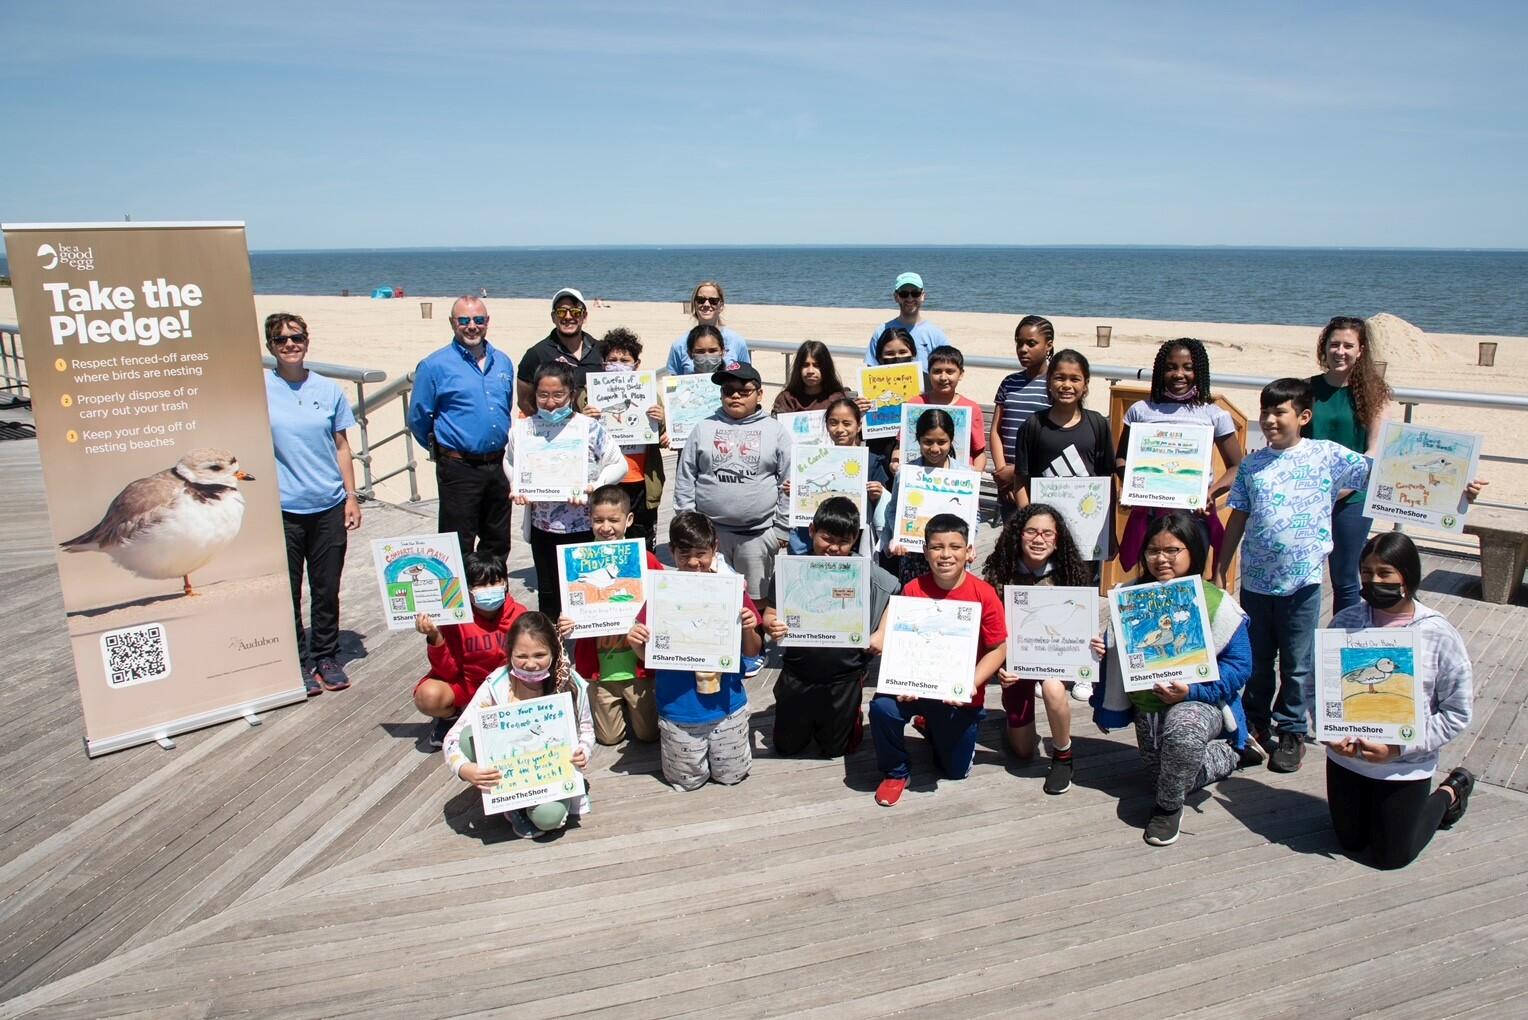 A large group of children with several adults smiling at a camera on a beach boardwalk. Each child holds a sign showing a hand-drawn illustration warning people to stay out of shorebird nesting sites, drawn by the children.